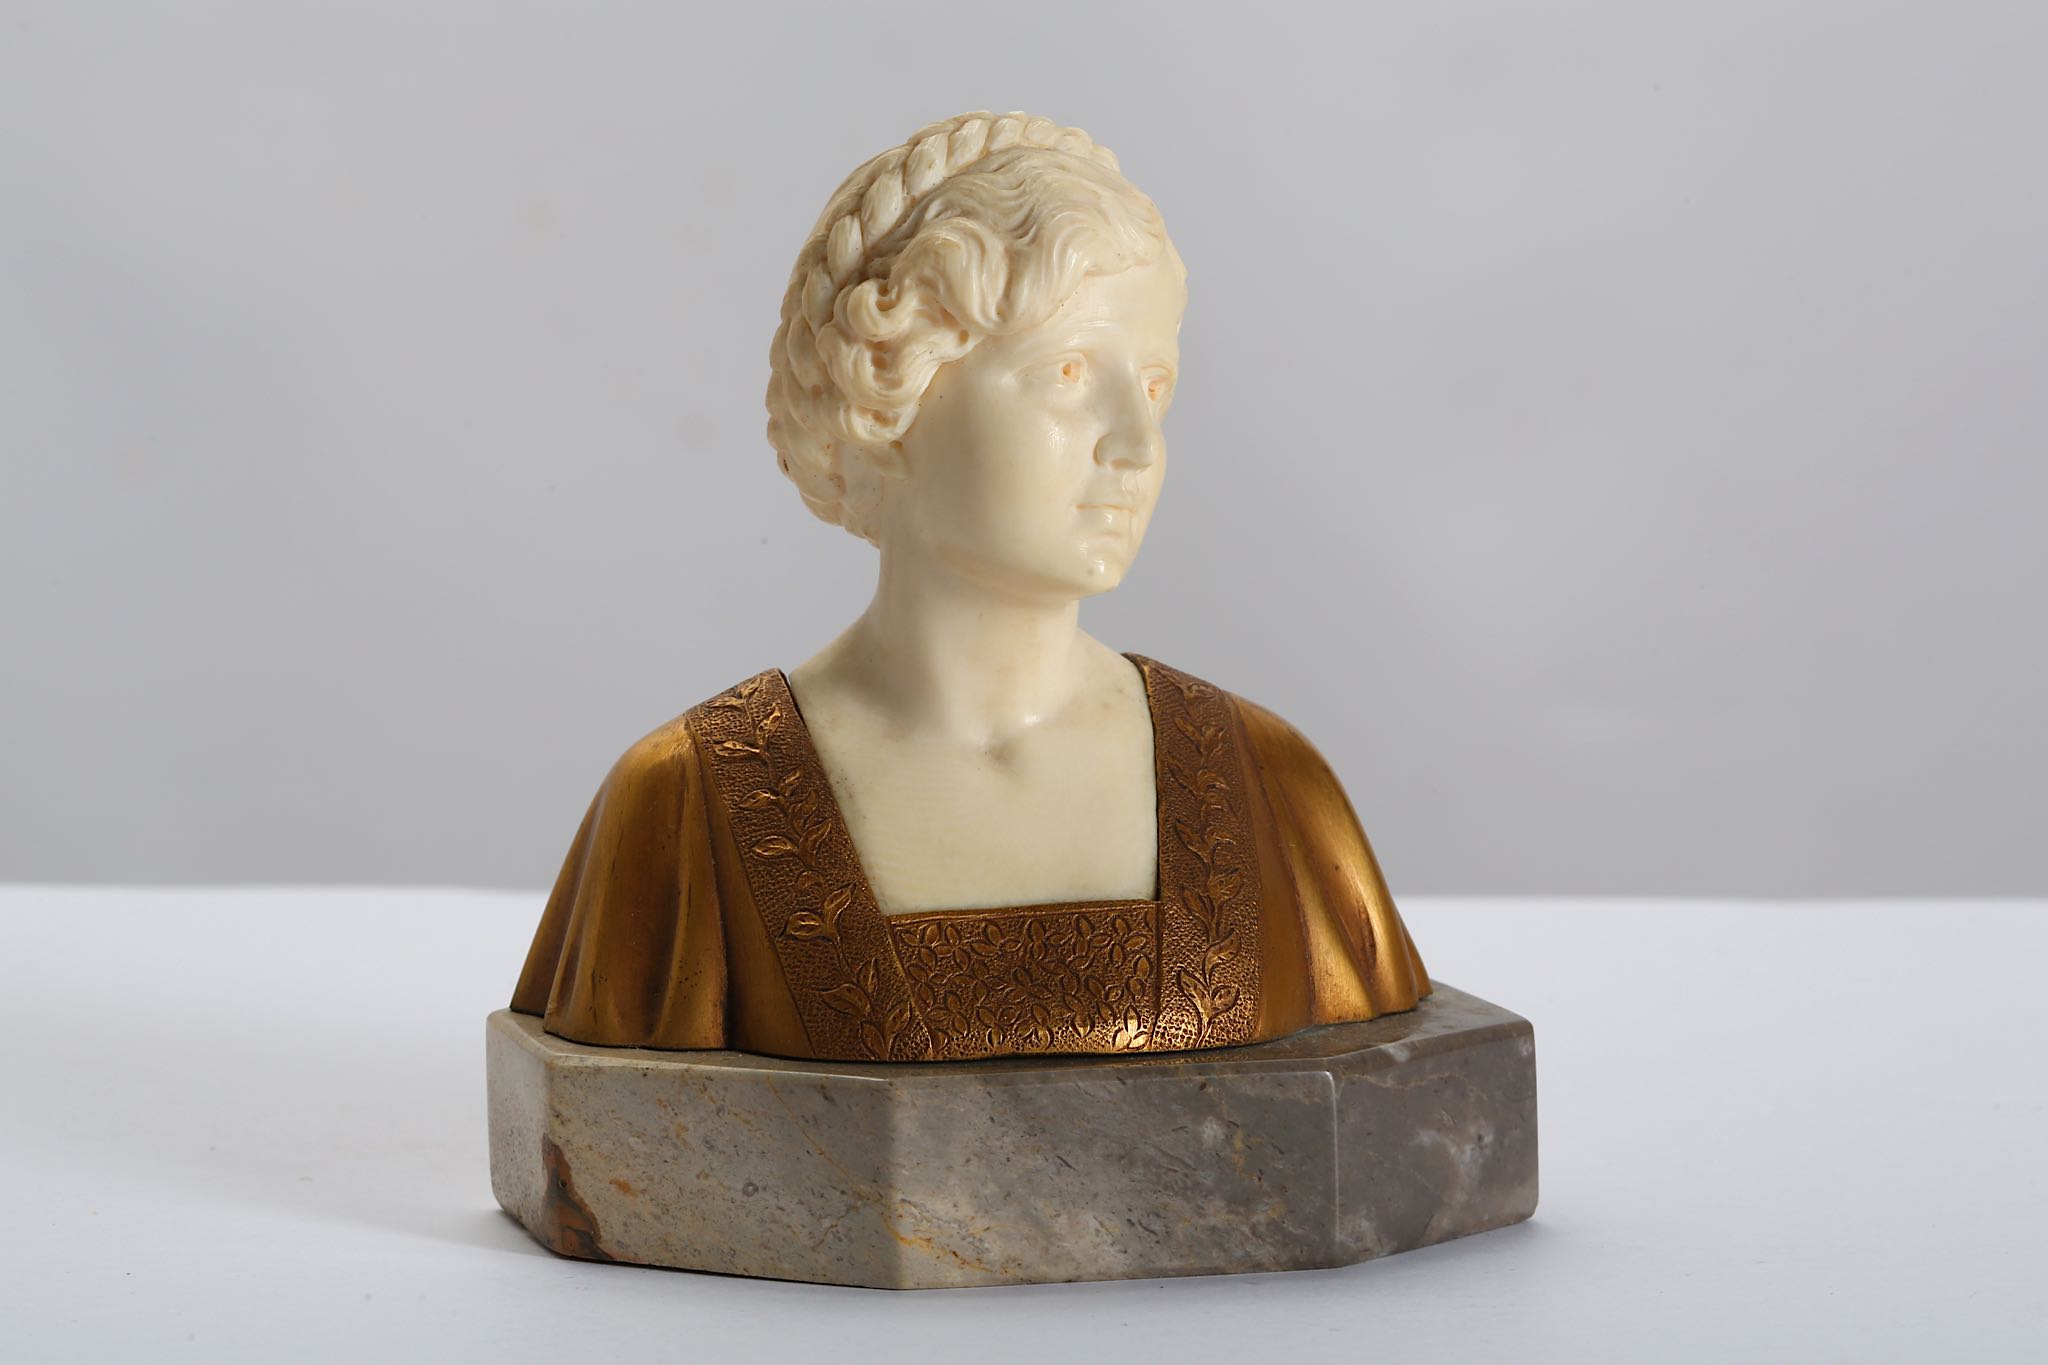 FERDINAND PREISS (GERMAN 1892-1943): AN IVORY AND GILT BRONZE BUST OF A GIRL  the young beauty - Image 2 of 8